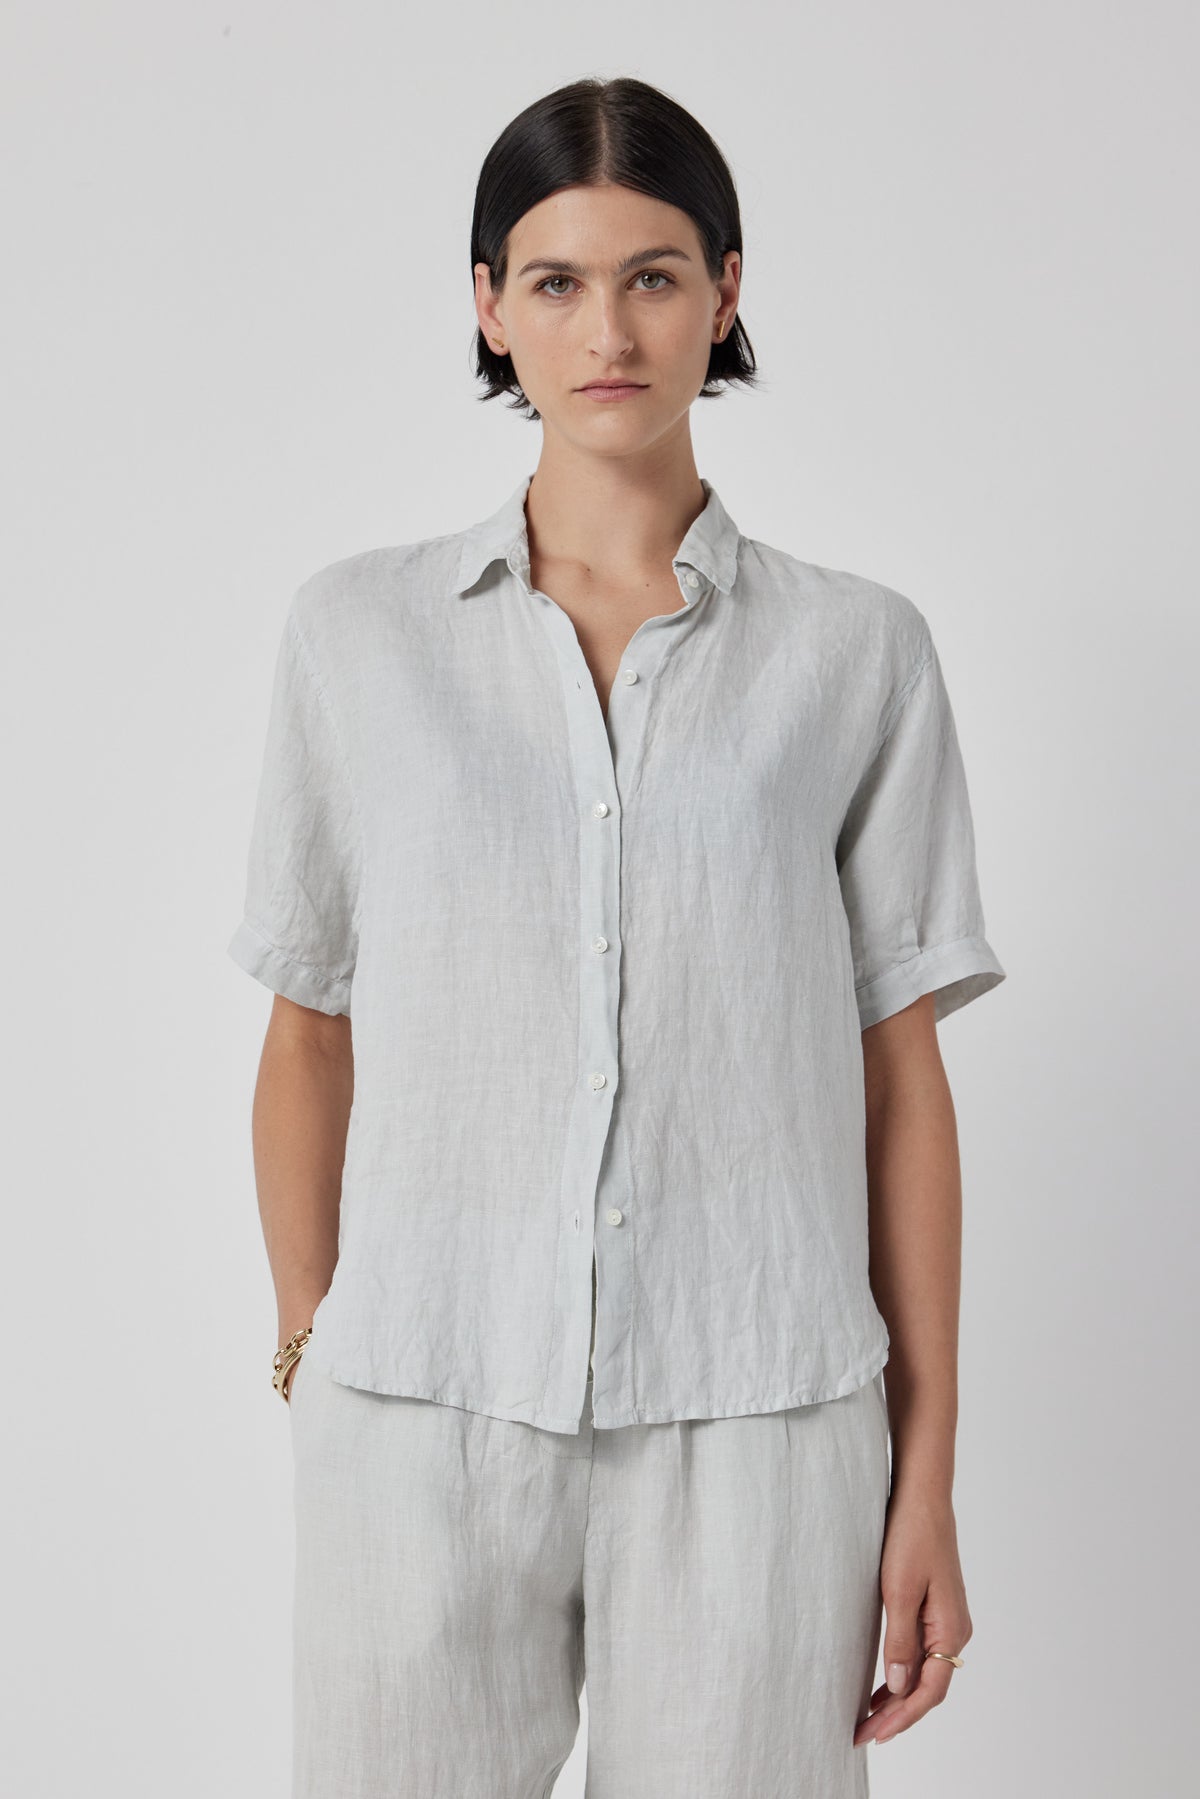 Woman in a casual CLAREMONT LINEN SHIRT by Velvet by Jenny Graham and trousers, standing against a plain white background.-36168678277313